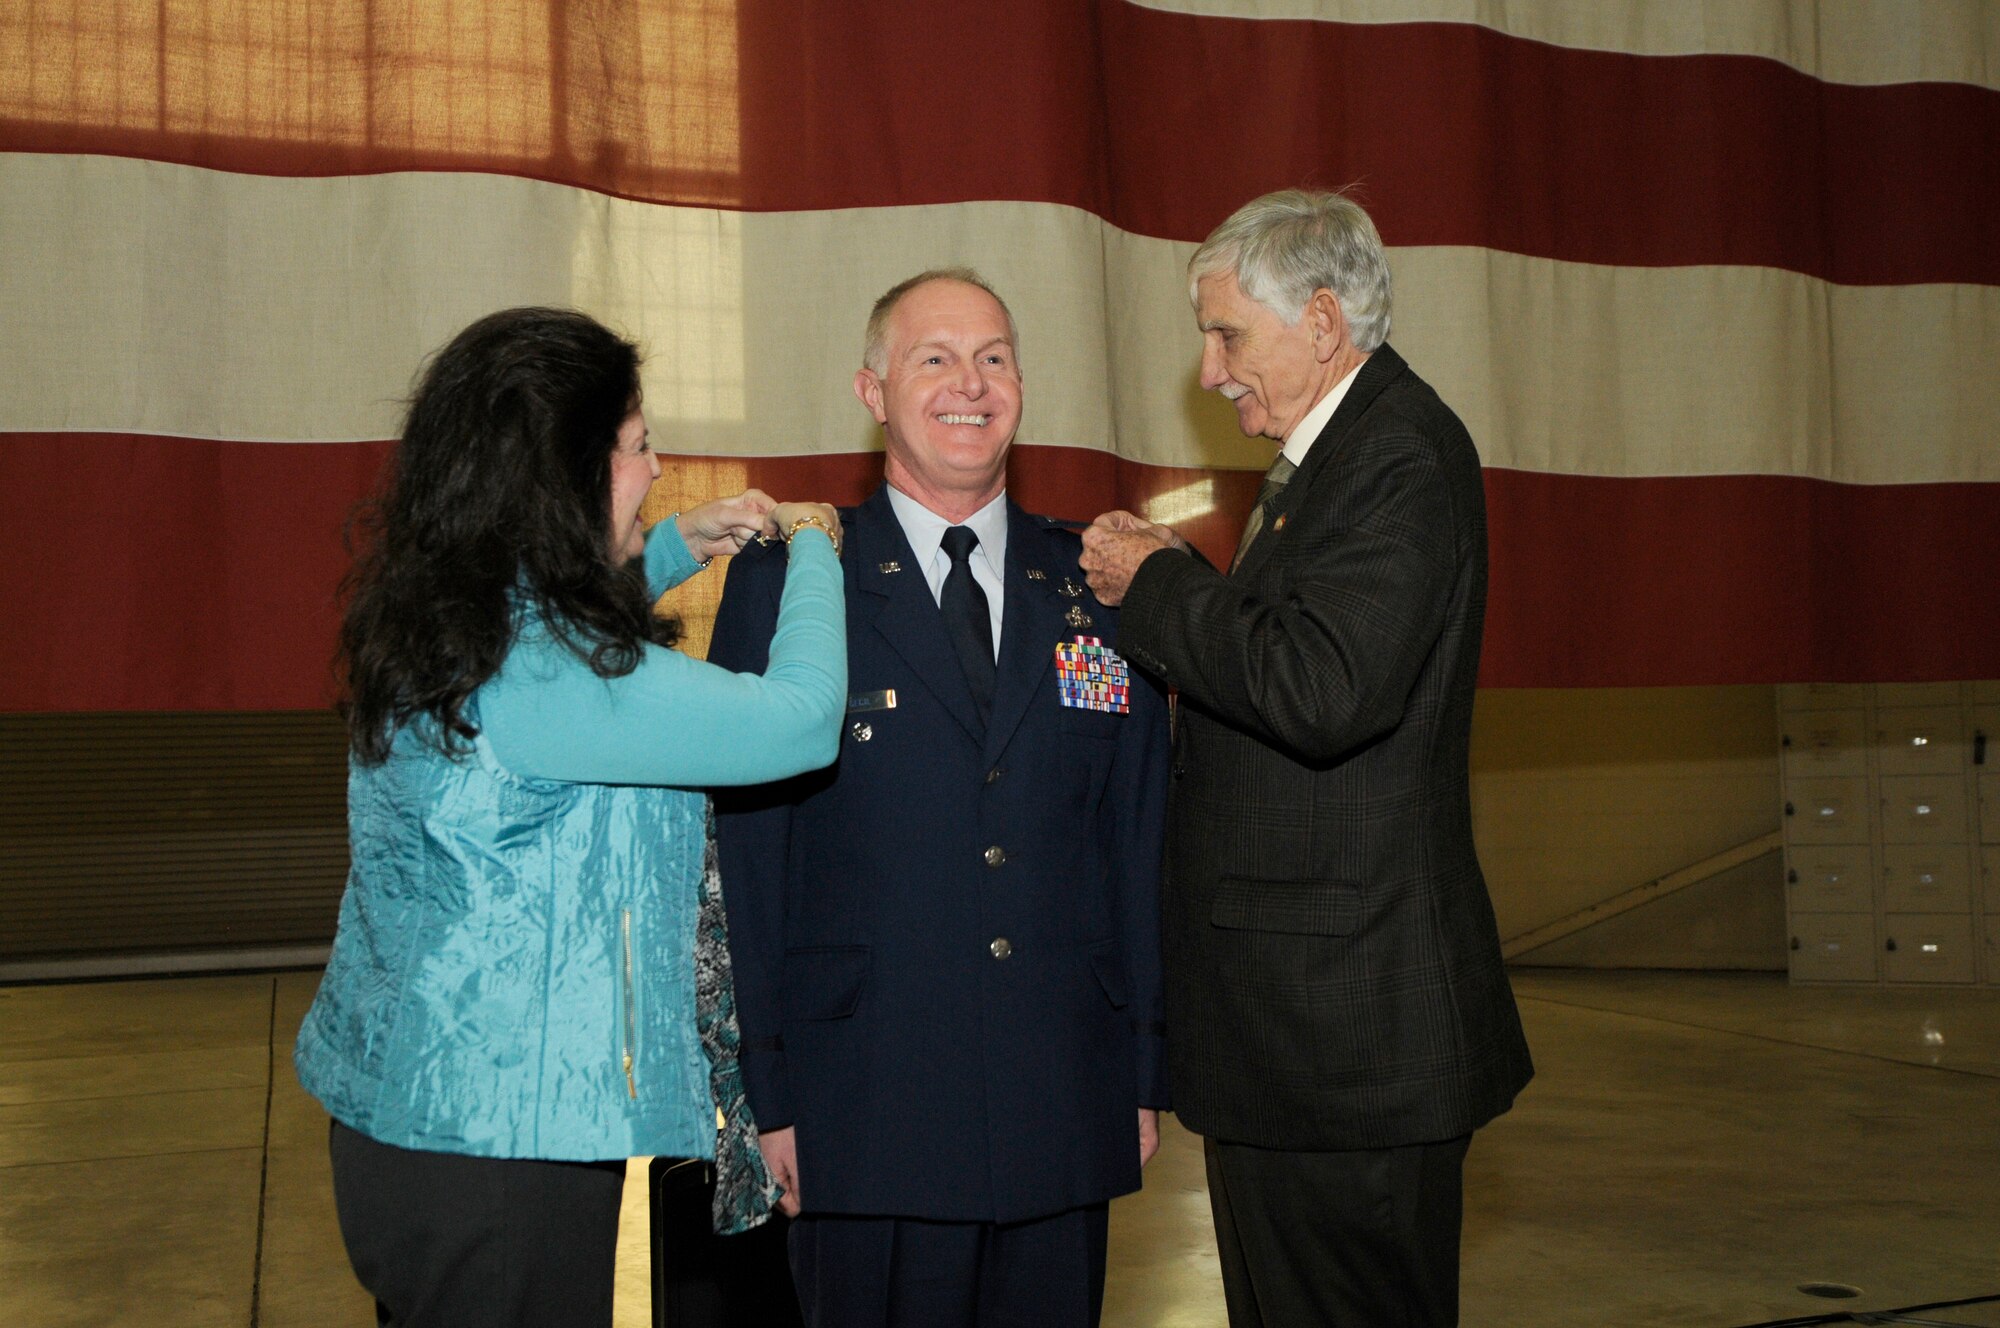 U.S. Air Force Lt. Col. Allan R. Cecil (center), deputy commander of the 145th Maintenance Group, has the rank of colonel pinned onto his uniform by his spouse and retired Brig. Gen. Fisk Outwater during a ceremony held in his honor at the North Carolina Air National Guard Base, Charlotte Douglas International Airport, Jan. 9, 2016. In 1977, at the rank of Master Sergeant, Cecil was commissioned as a weather officer. (U.S. Air National Guard photo by Staff Sgt. Julianne M. Showalter/Released)